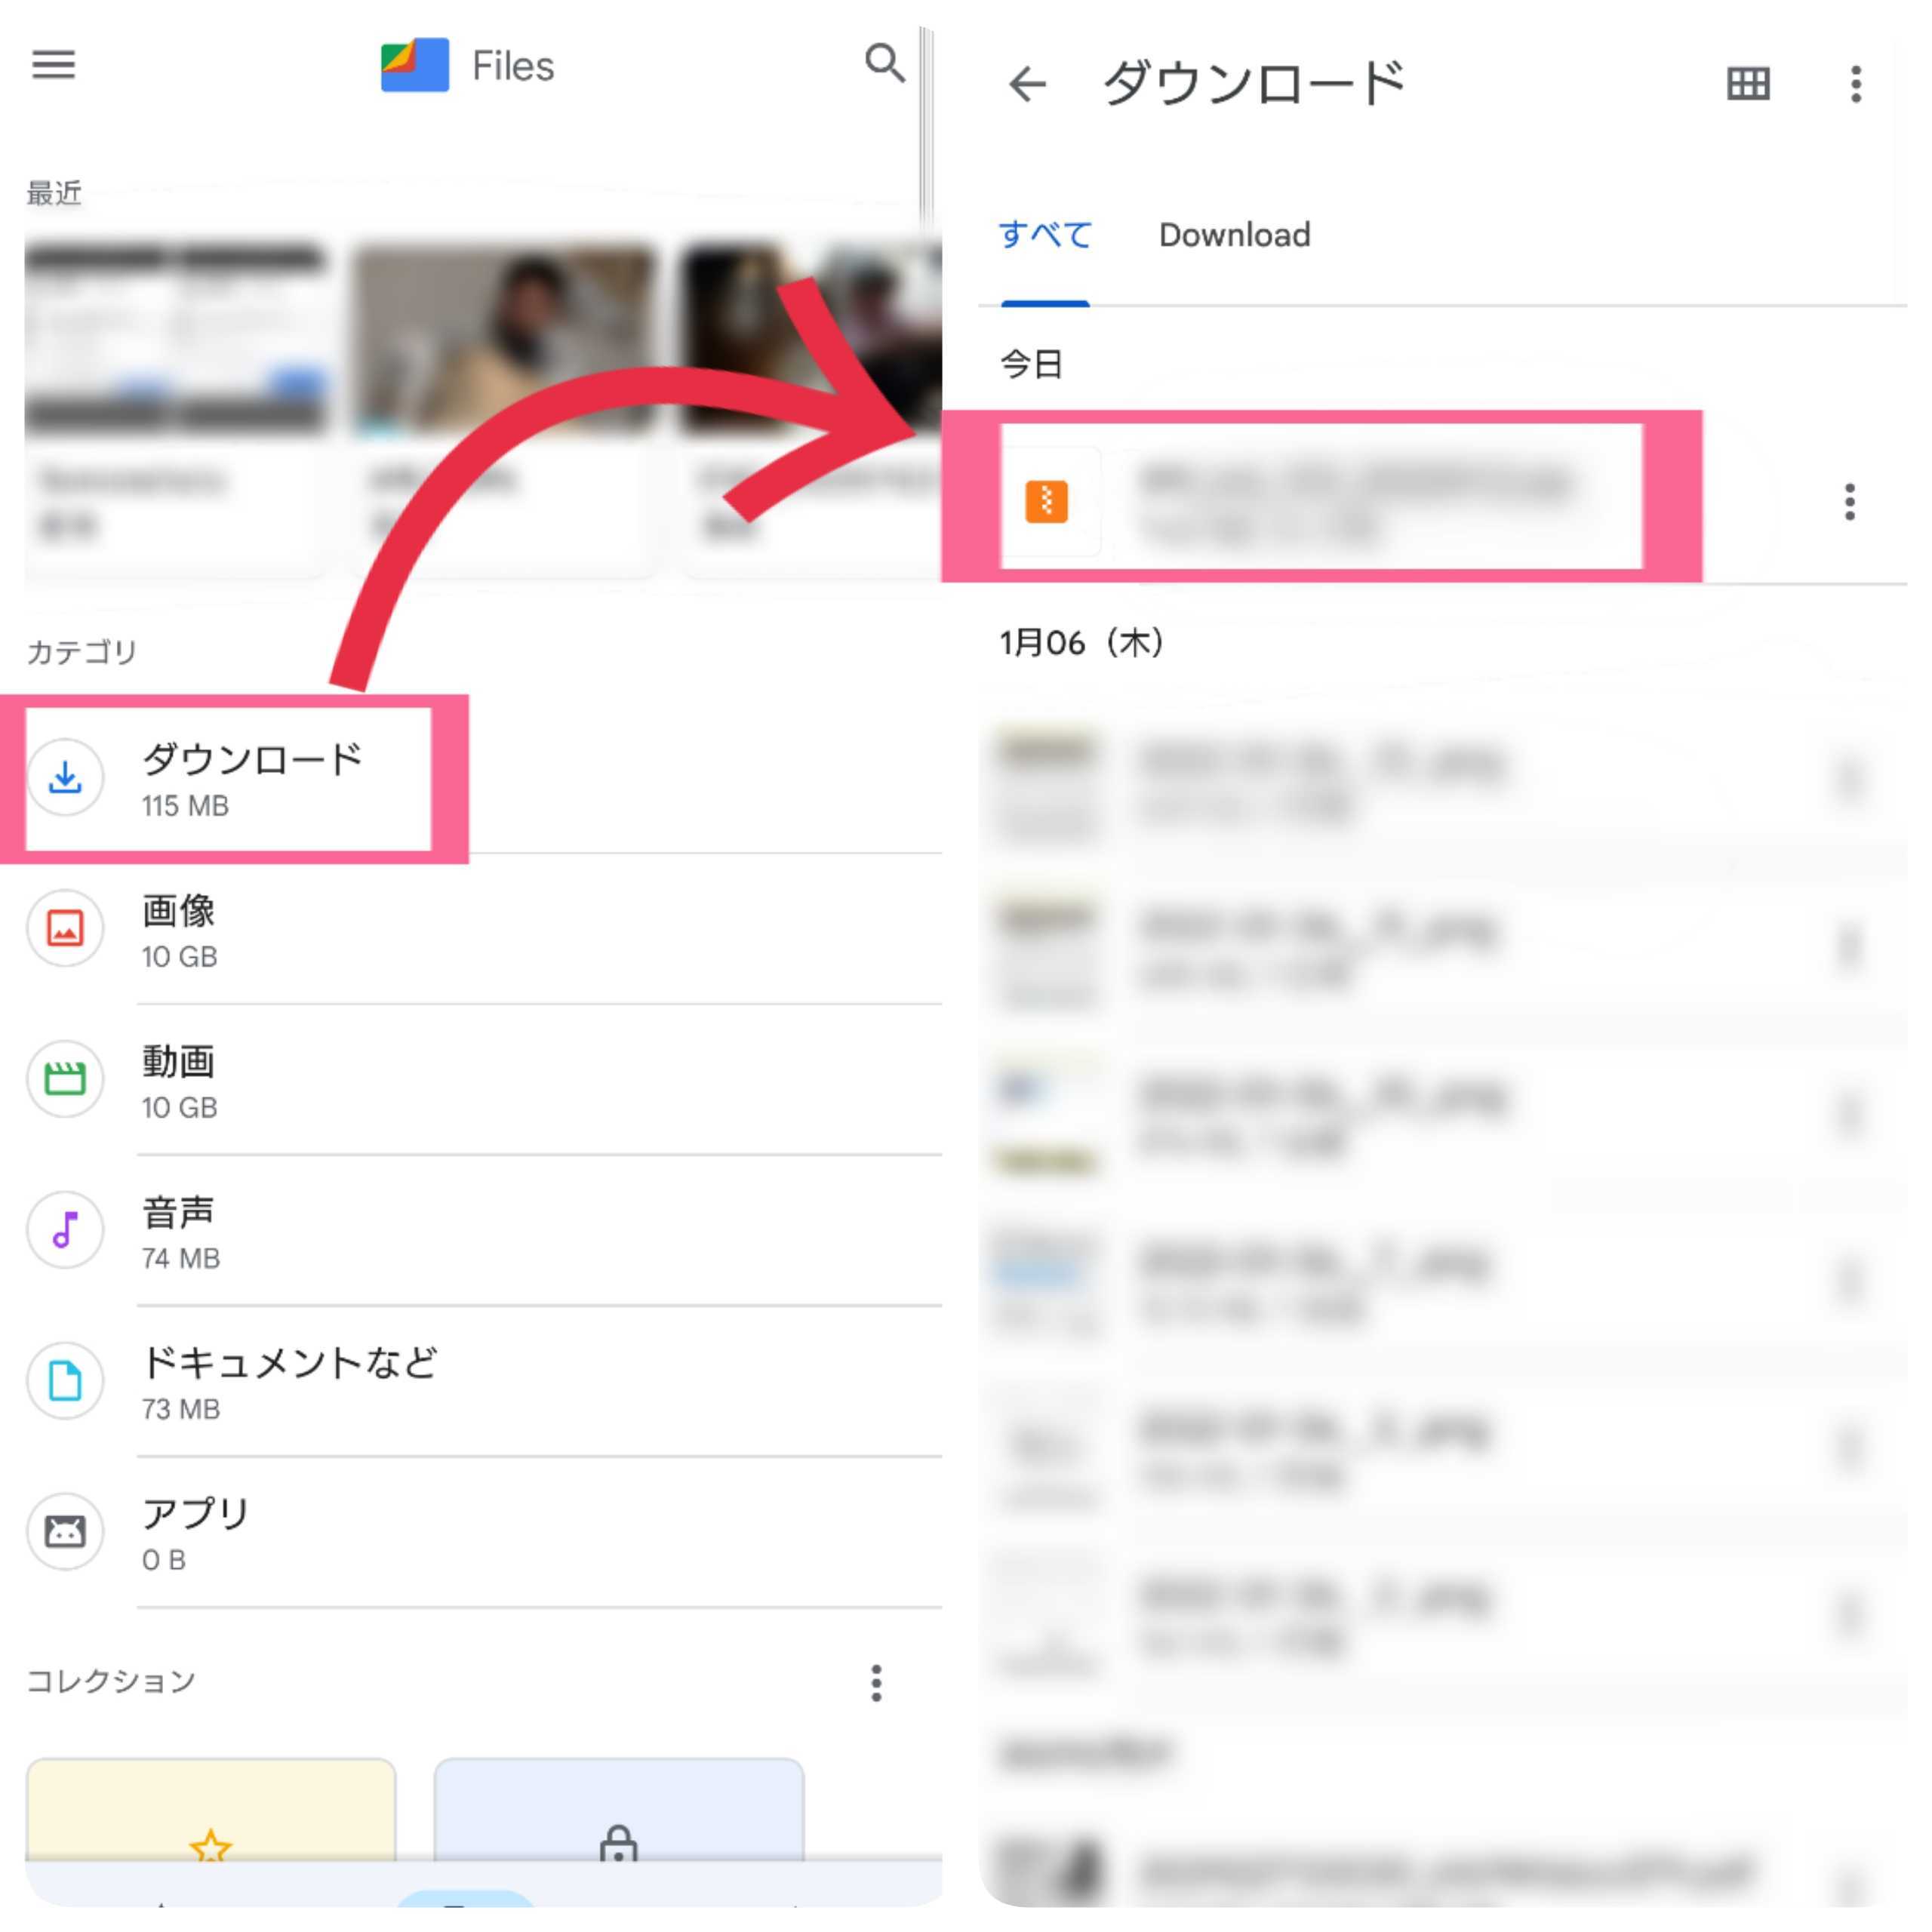 Android　Files by Google　ダウンロード　zip　ファイル　タップ